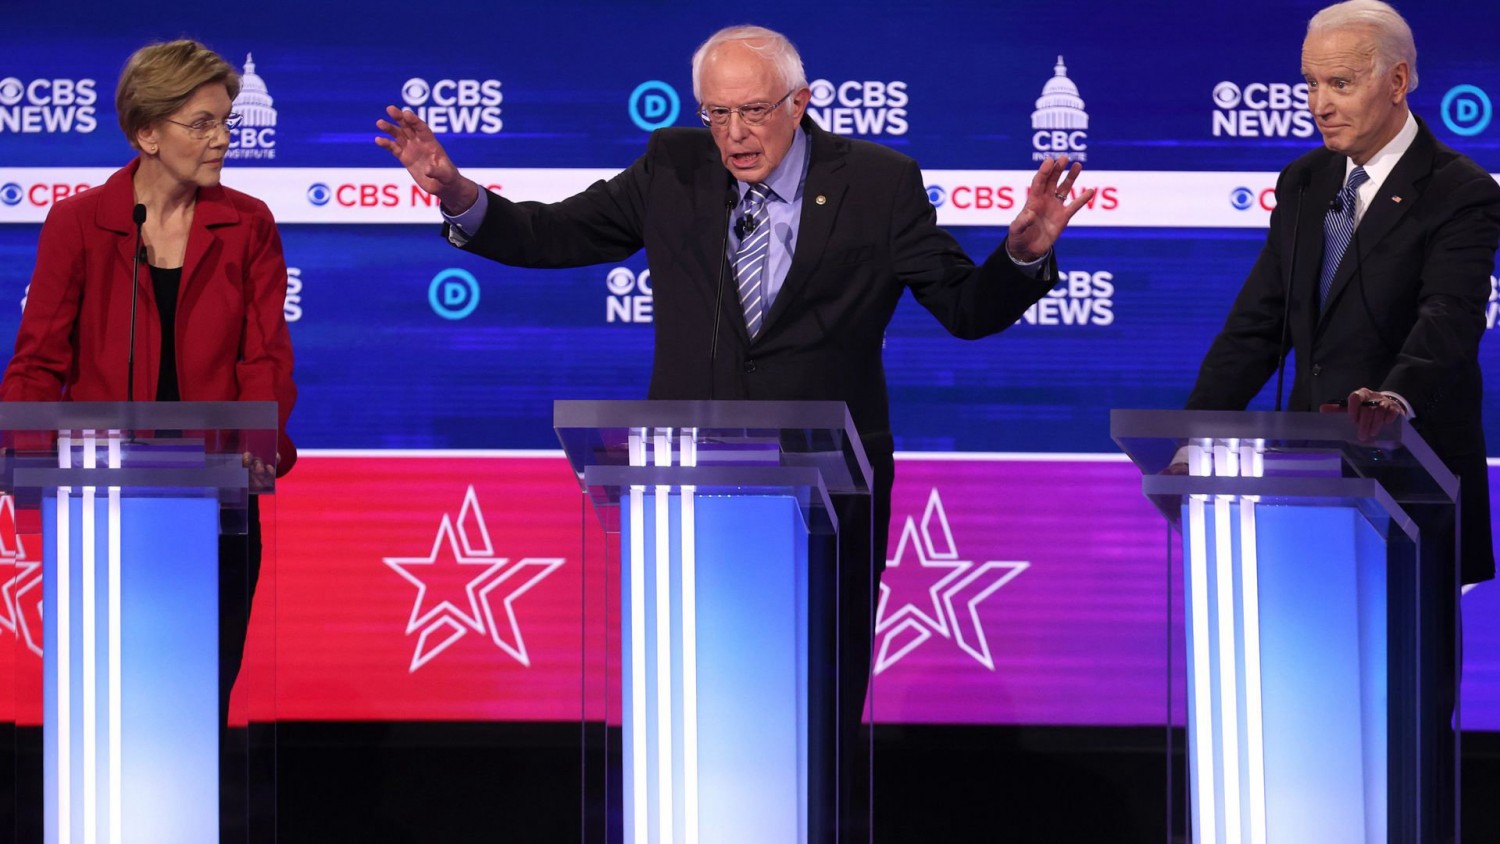 Candidates questioned whether Bernie Sanders could beat President Trump in a general election during the Democratic presidential debate in South Carolina. Photo: Win McNamee/Getty Images